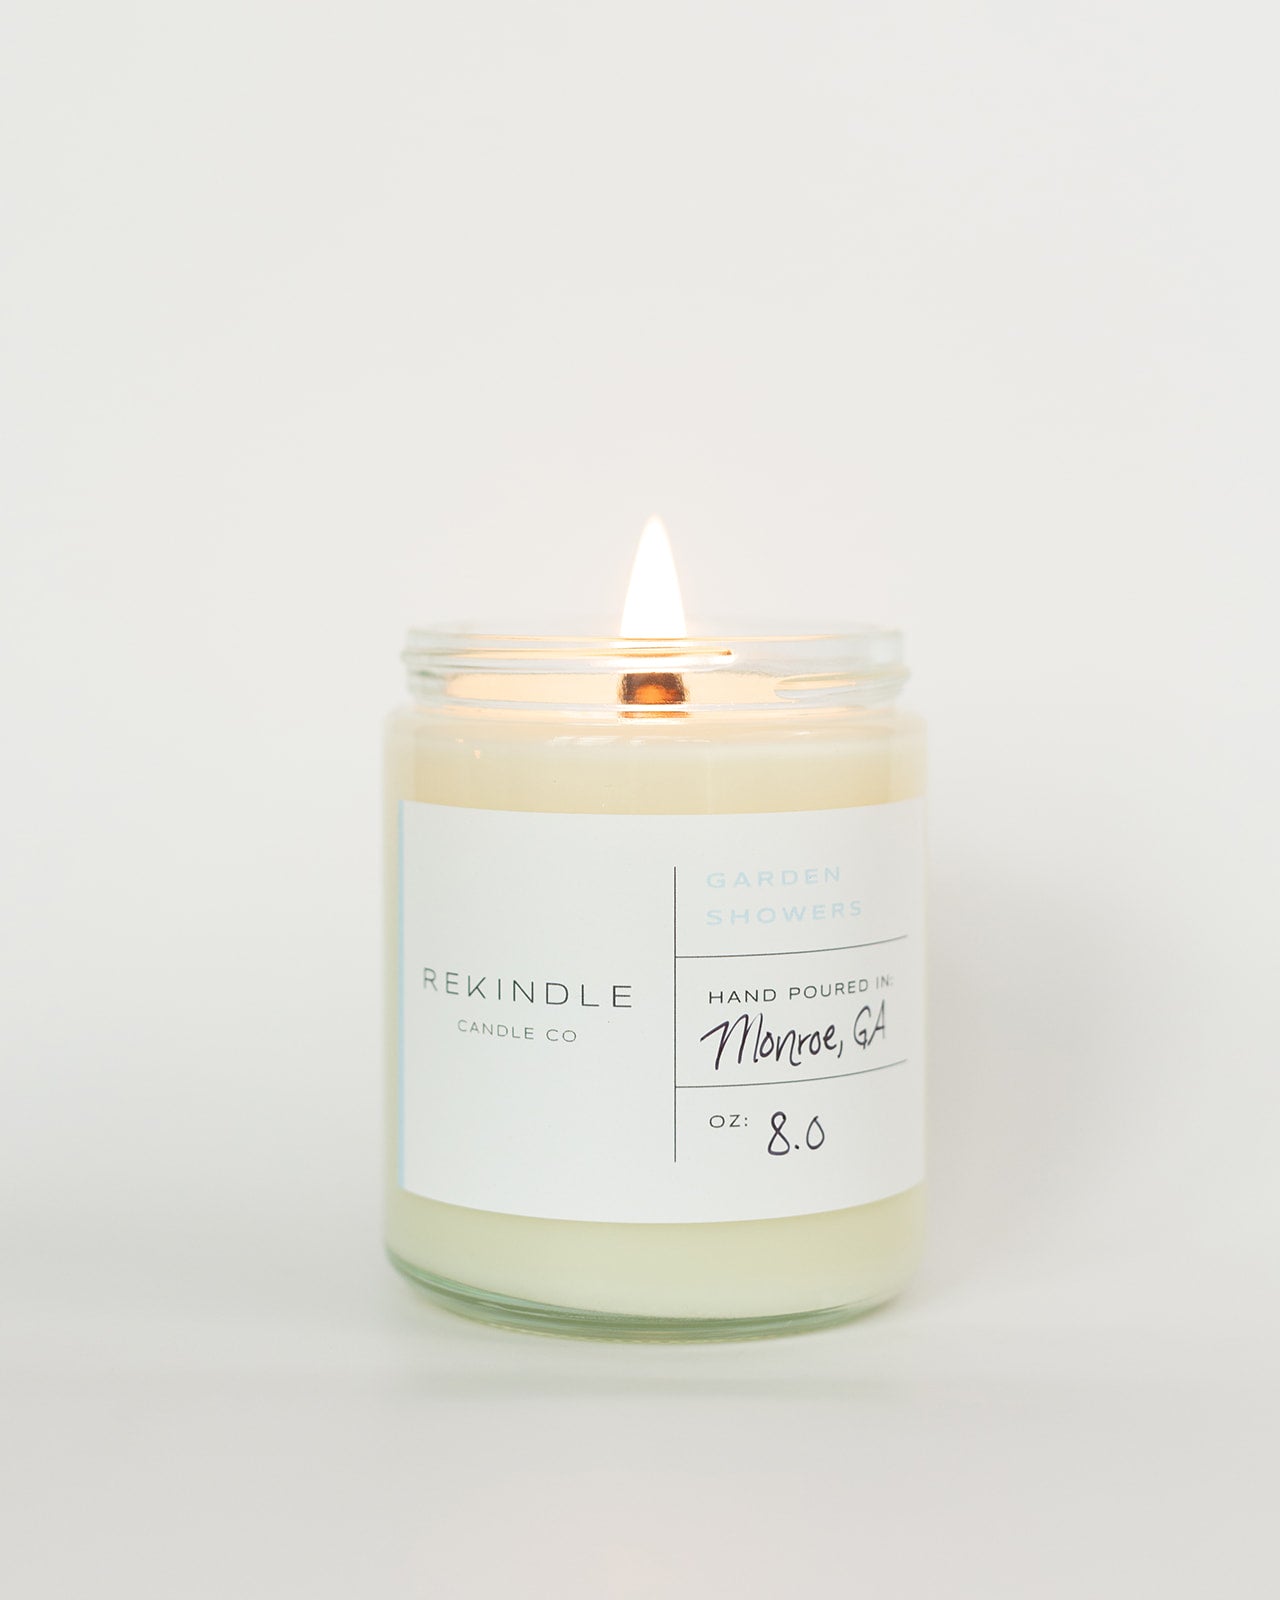 Garden Showers Soy Candle